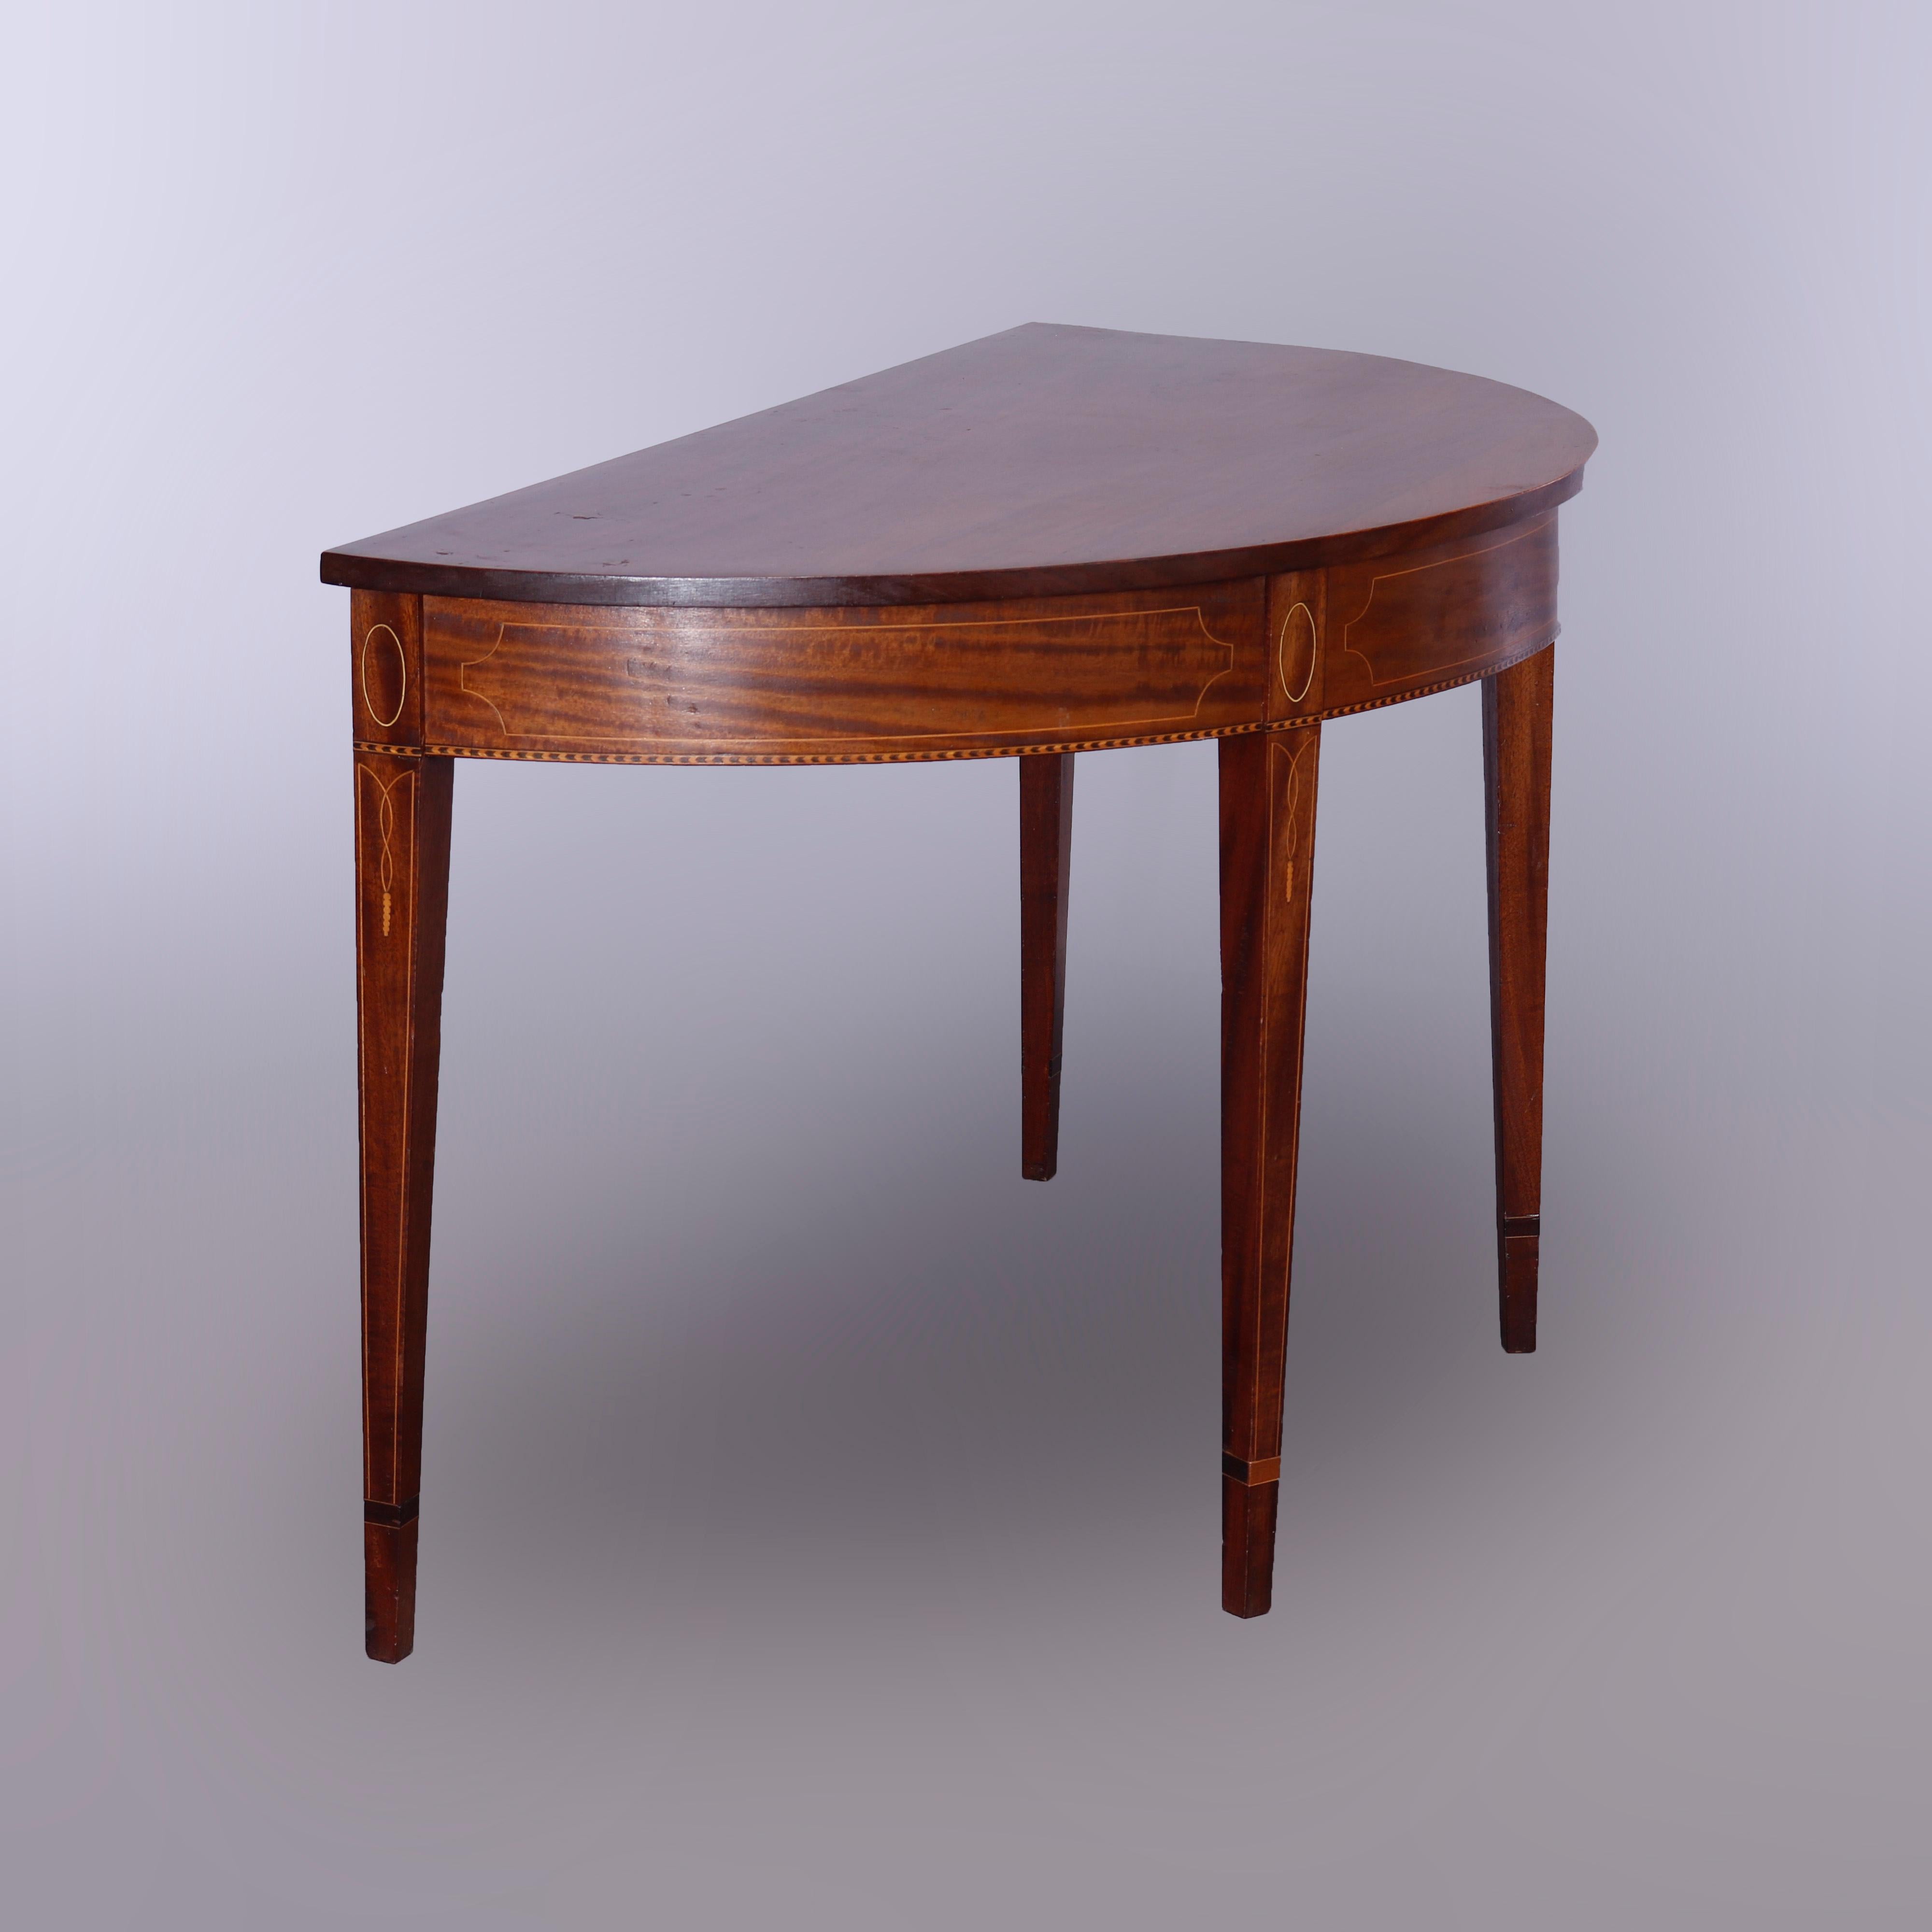 An antique Hepplewhite banquet dining table offers flame mahogany construction with satinwood inlaid decoration throughout and includes two demilune sections and one drop leaf section, each raised on square and tapered legs, 19th century

Measures